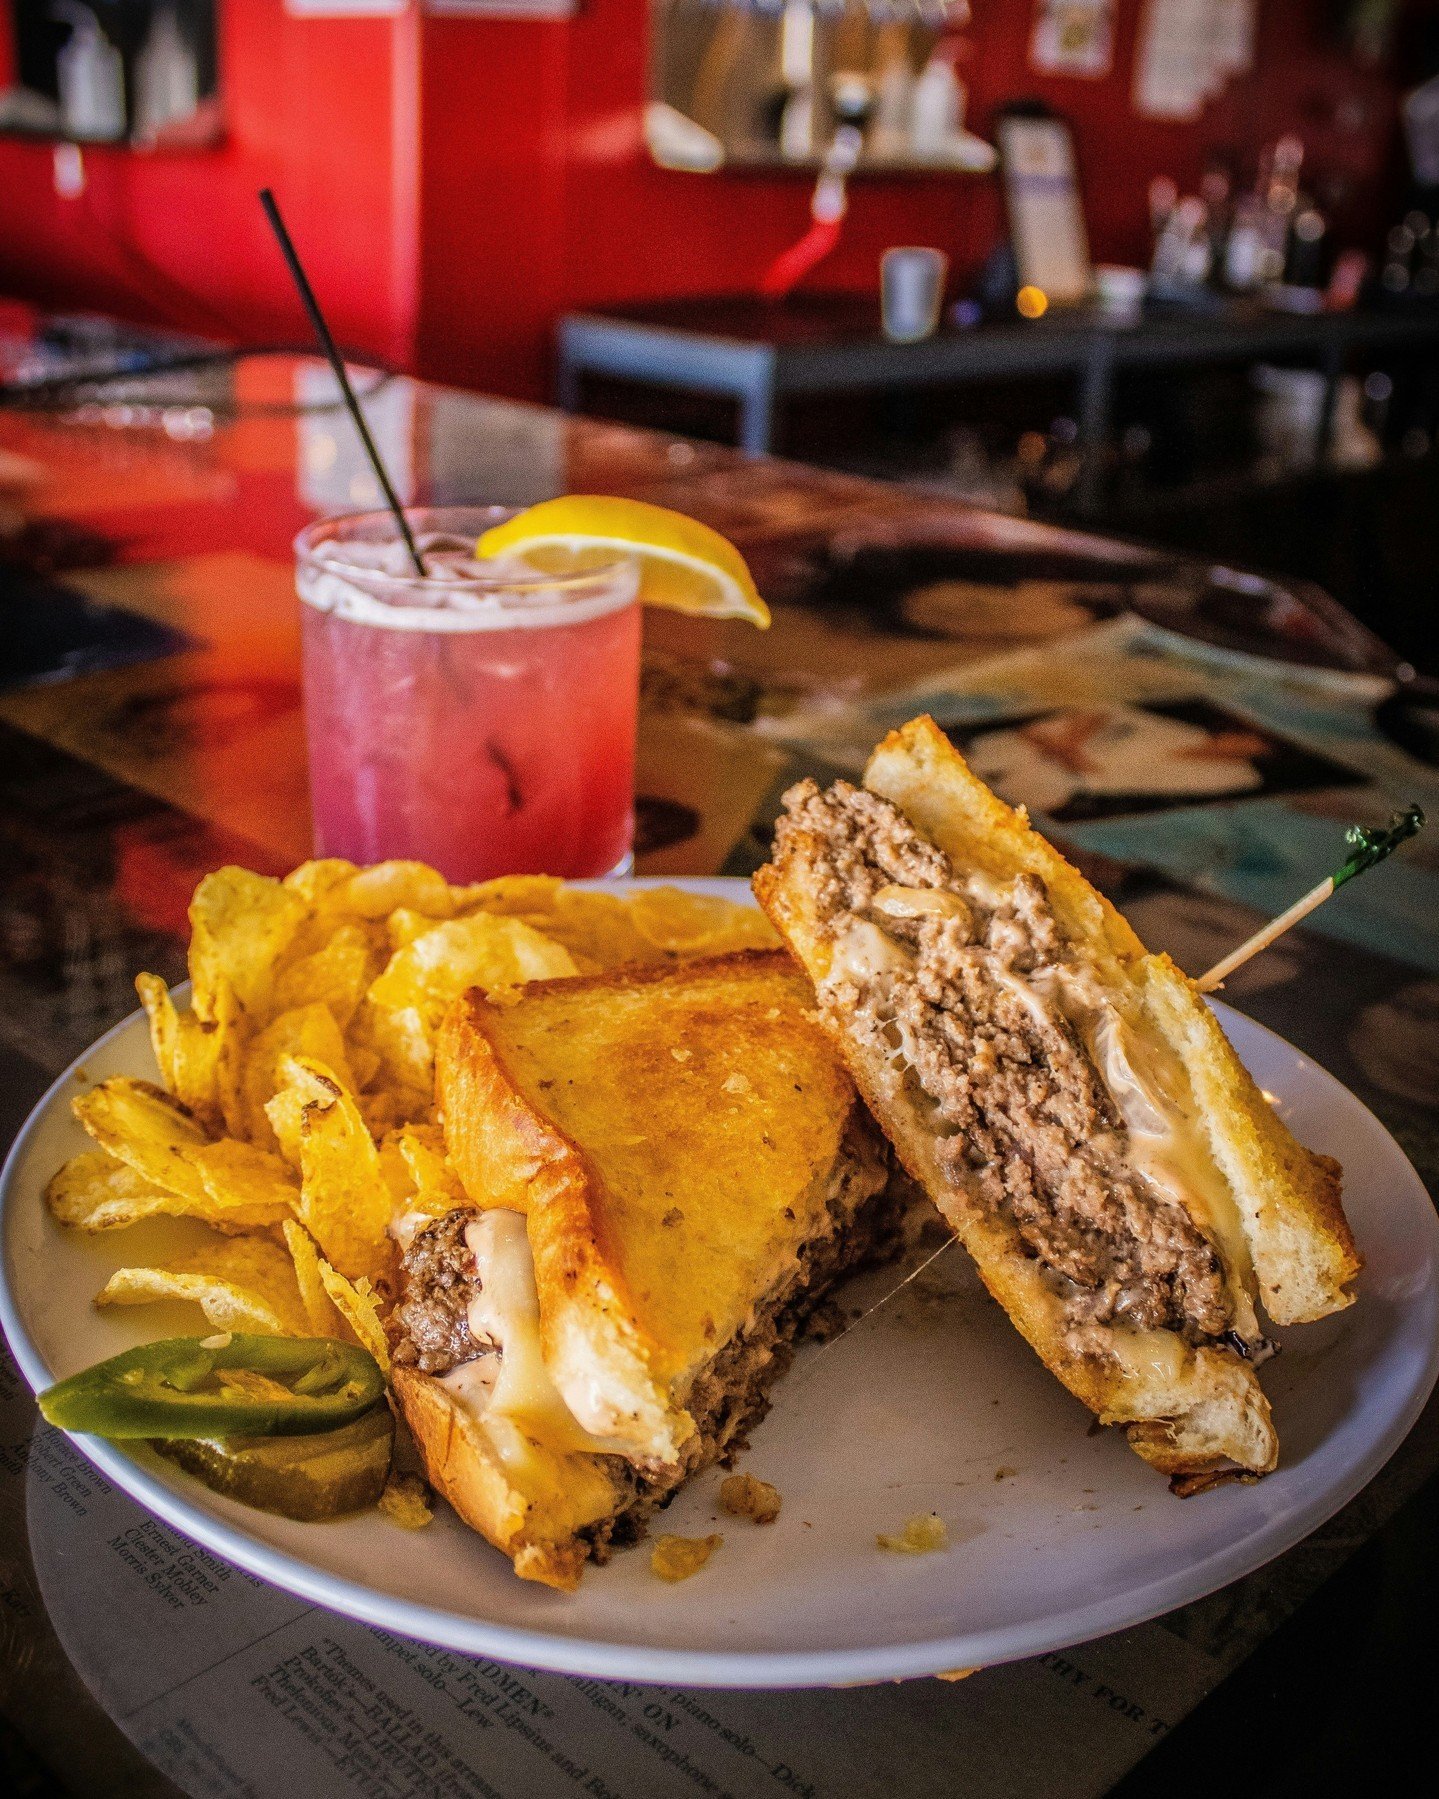 Dive into the ultimate comfort food feast! Snag our patty melt while it's still here!